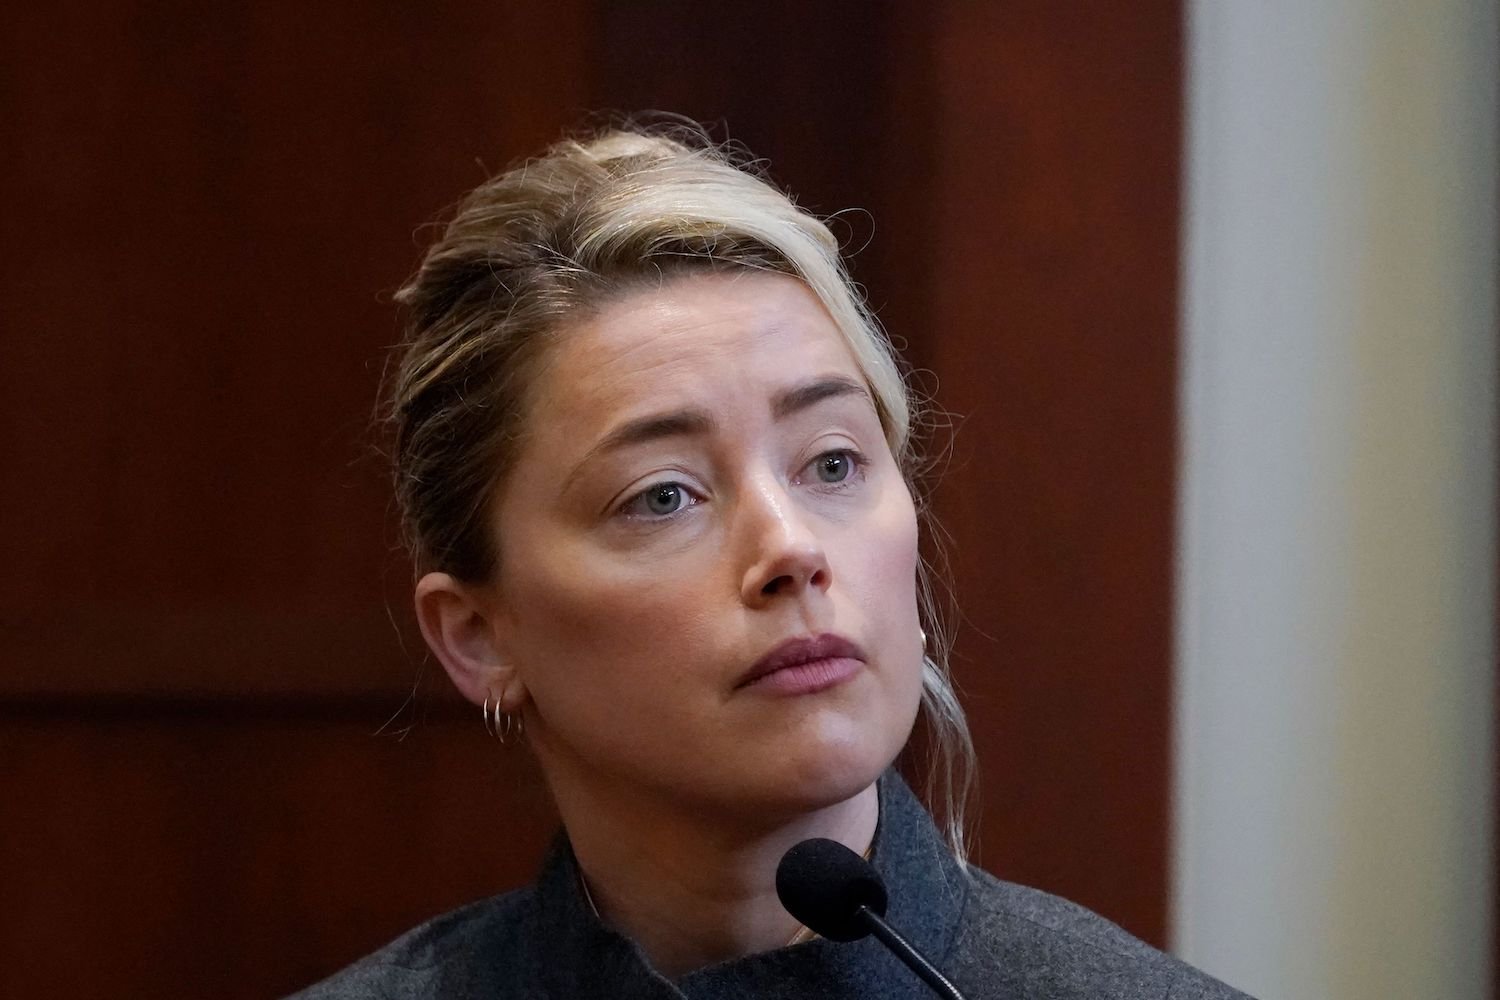 Amber Heard wears a gray suit while on the stand during cross-examination at Johnny Depp defamation trial